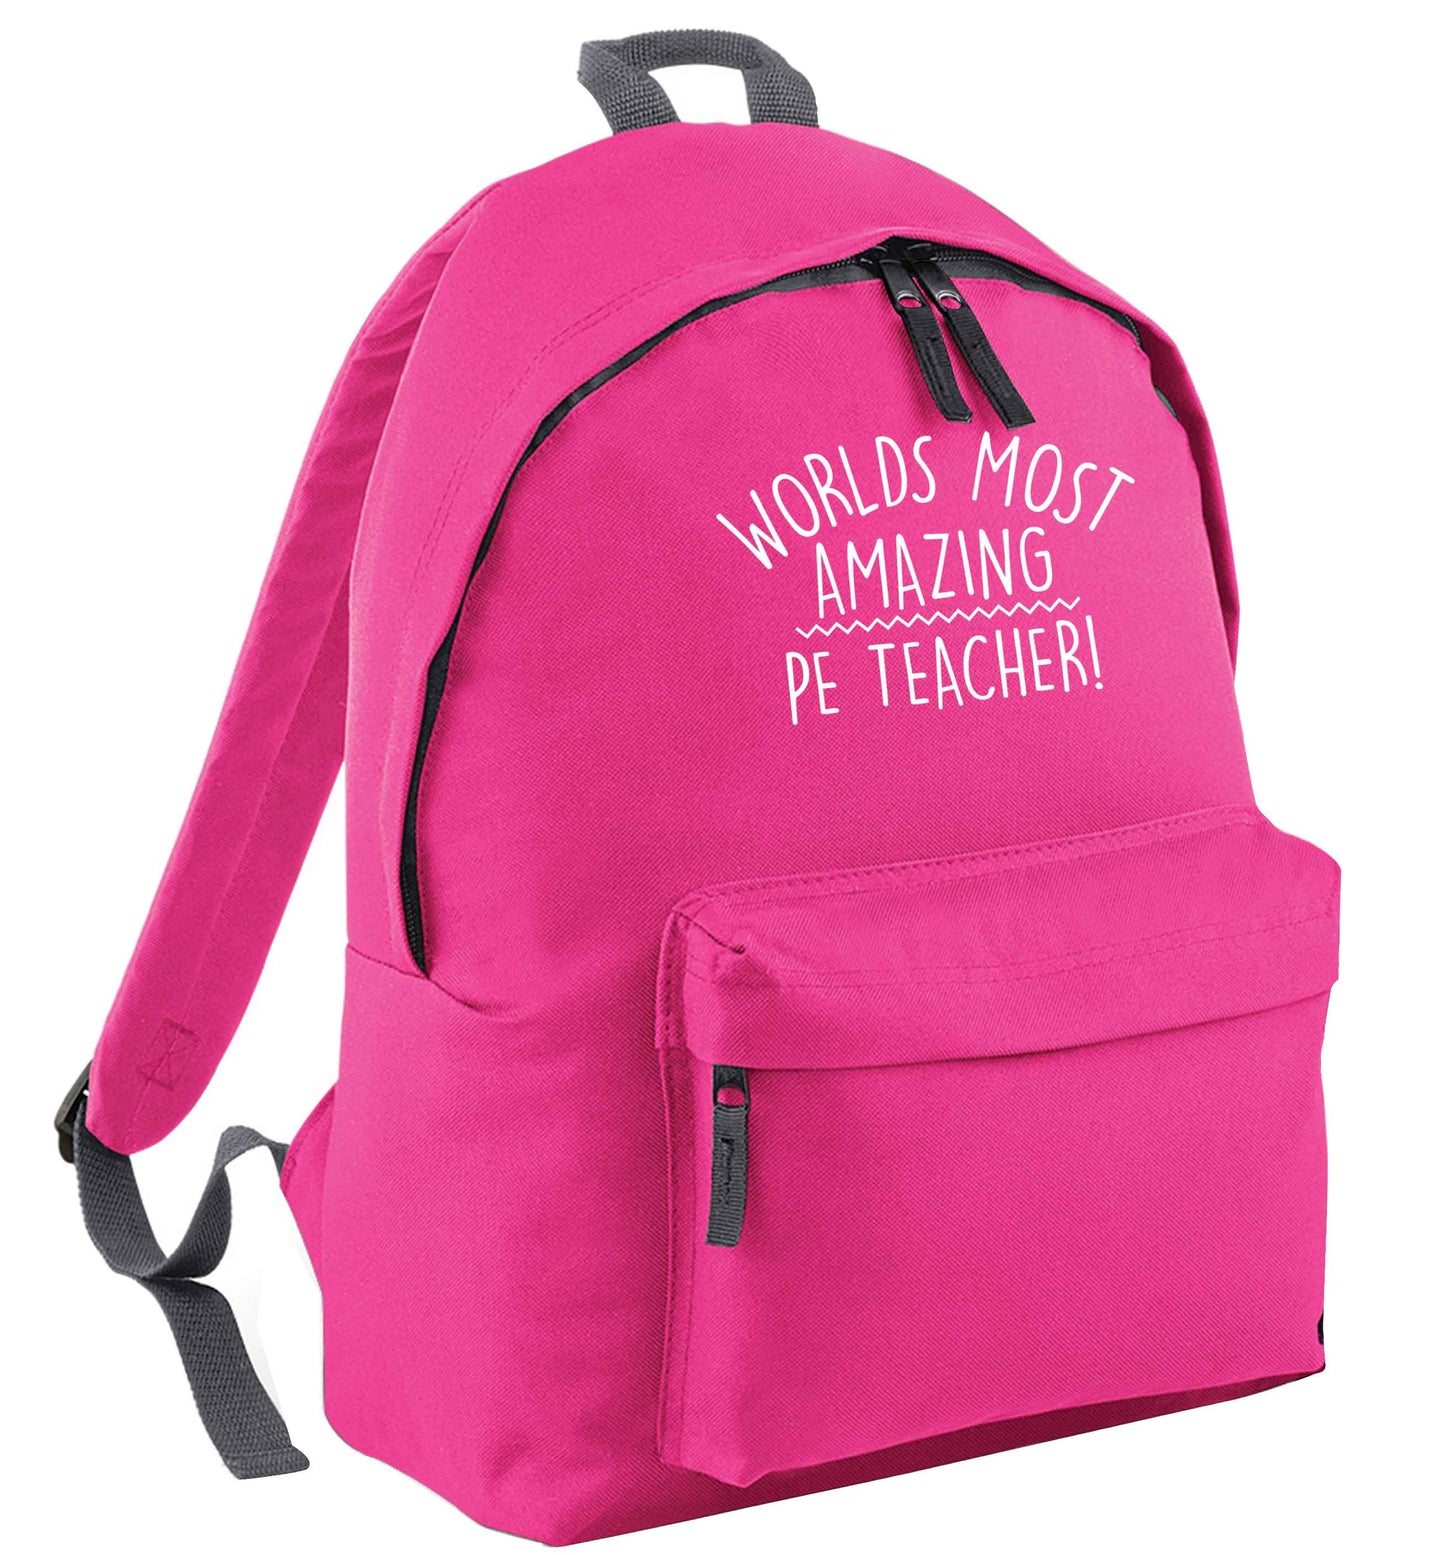 Worlds most amazing PE teacher pink adults backpack